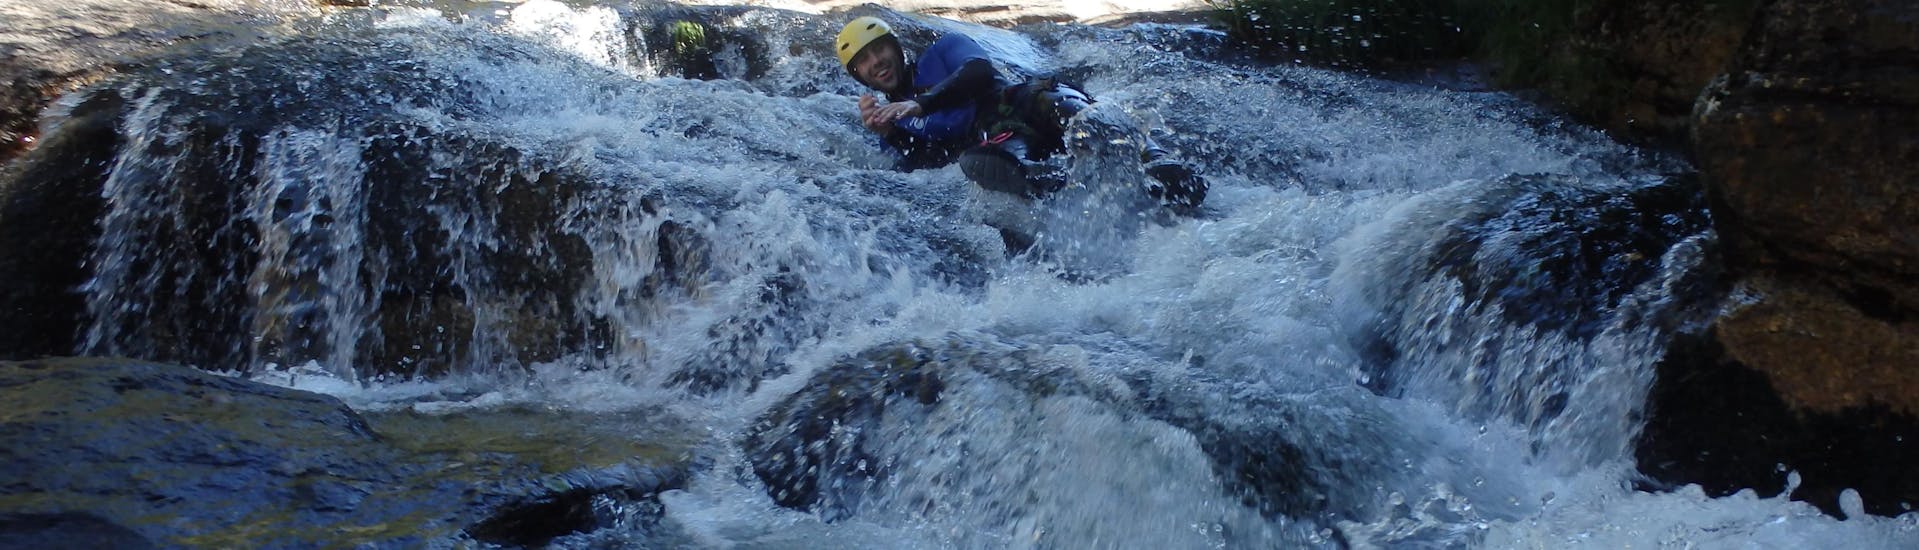 Eenvoudige Canyoning in A Arrotea - Río Almofrei.